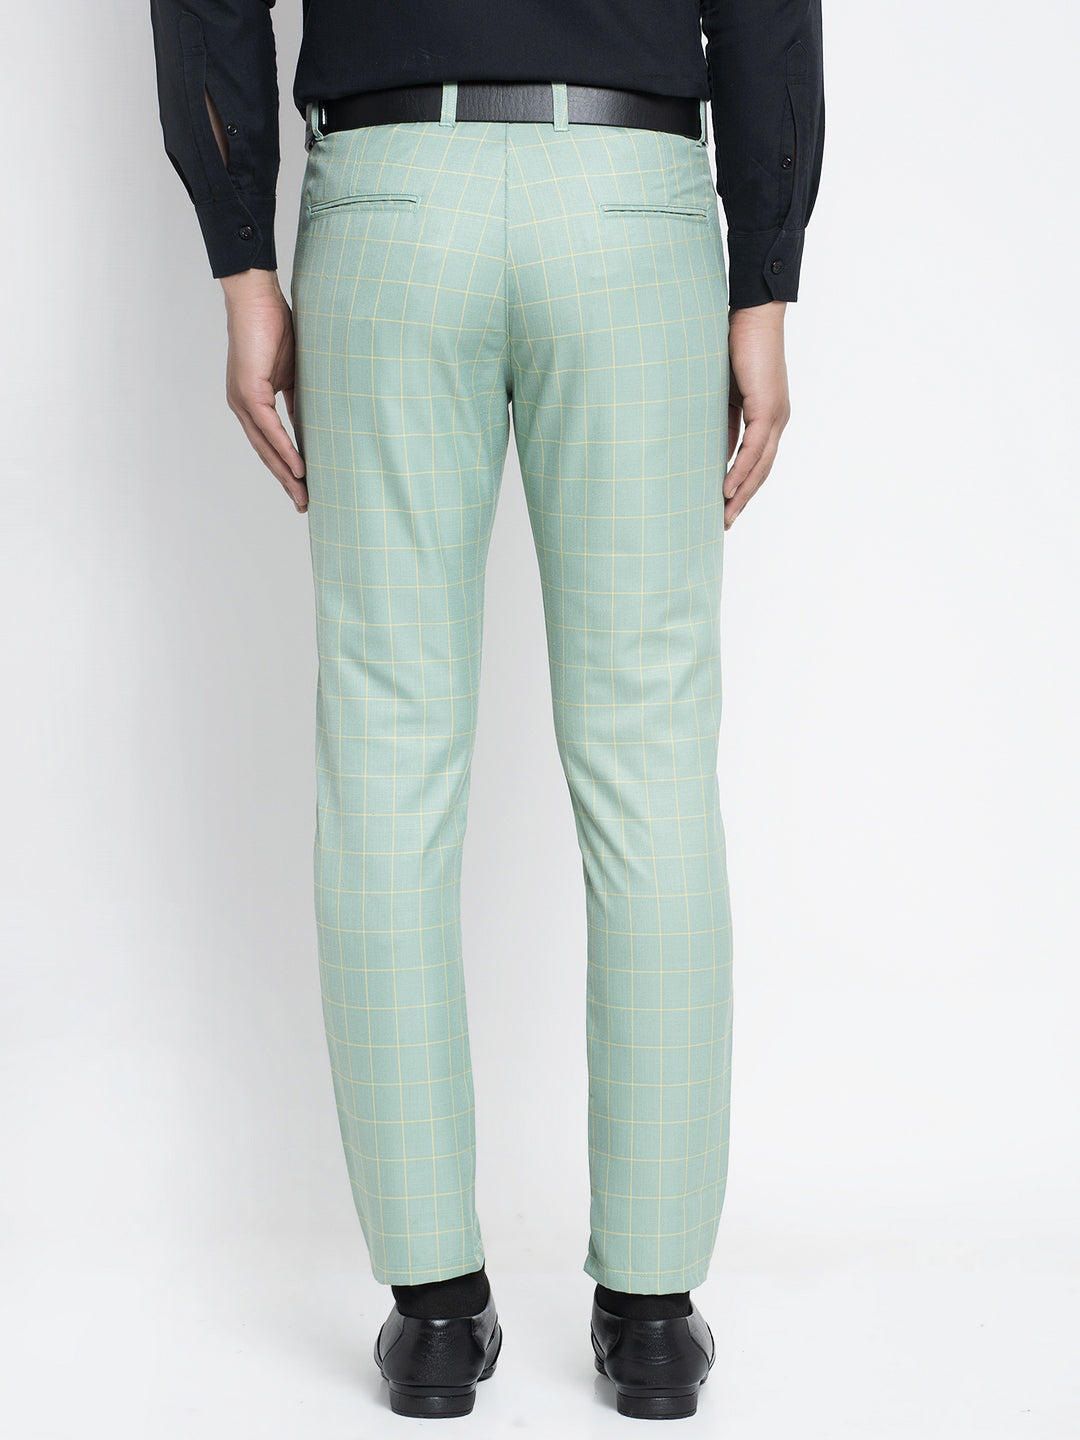 Buy RAYMOND Green Mens Printed Formal Trousers | Shoppers Stop